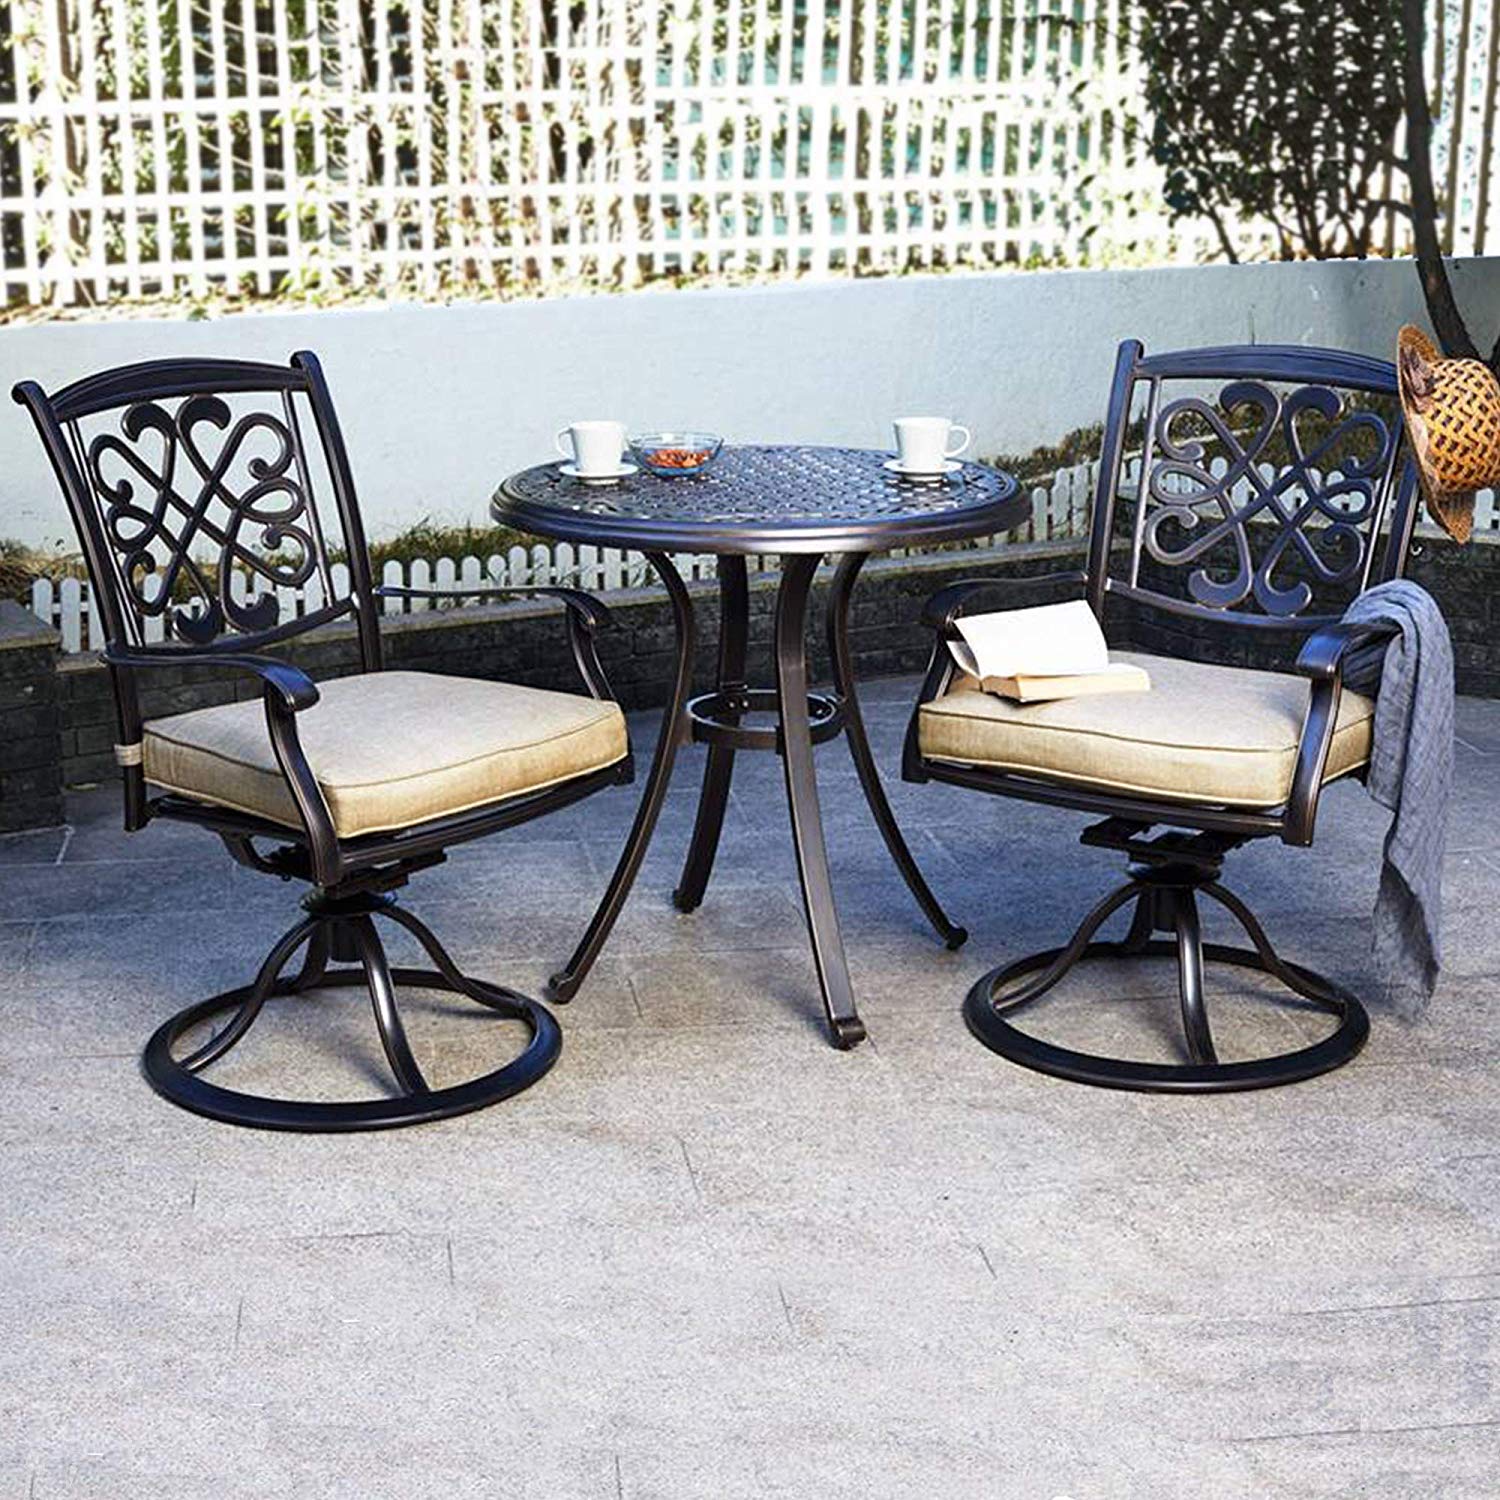 3 Piece Bistro Table Chairs Set, Cast Aluminum Dining Table Patio Glider Chairs Garden Backyard Outdoor Furniture - image 5 of 7